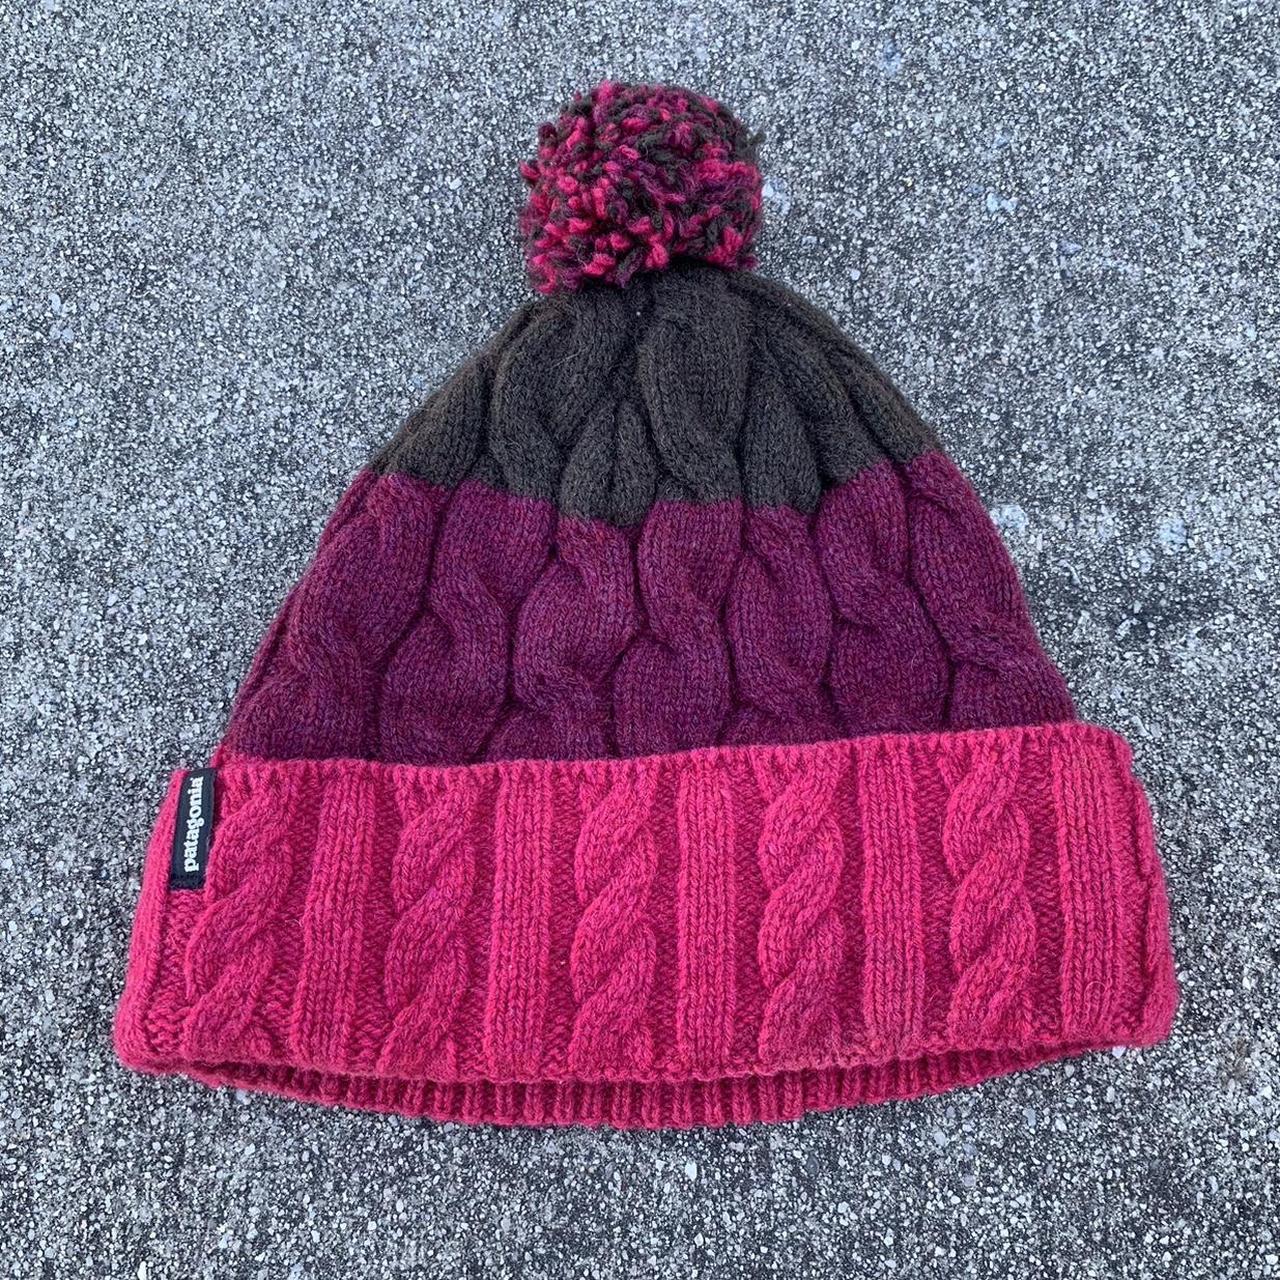 Fall 2019 Patagonia Cable Knit Fleece Lined Magenta...